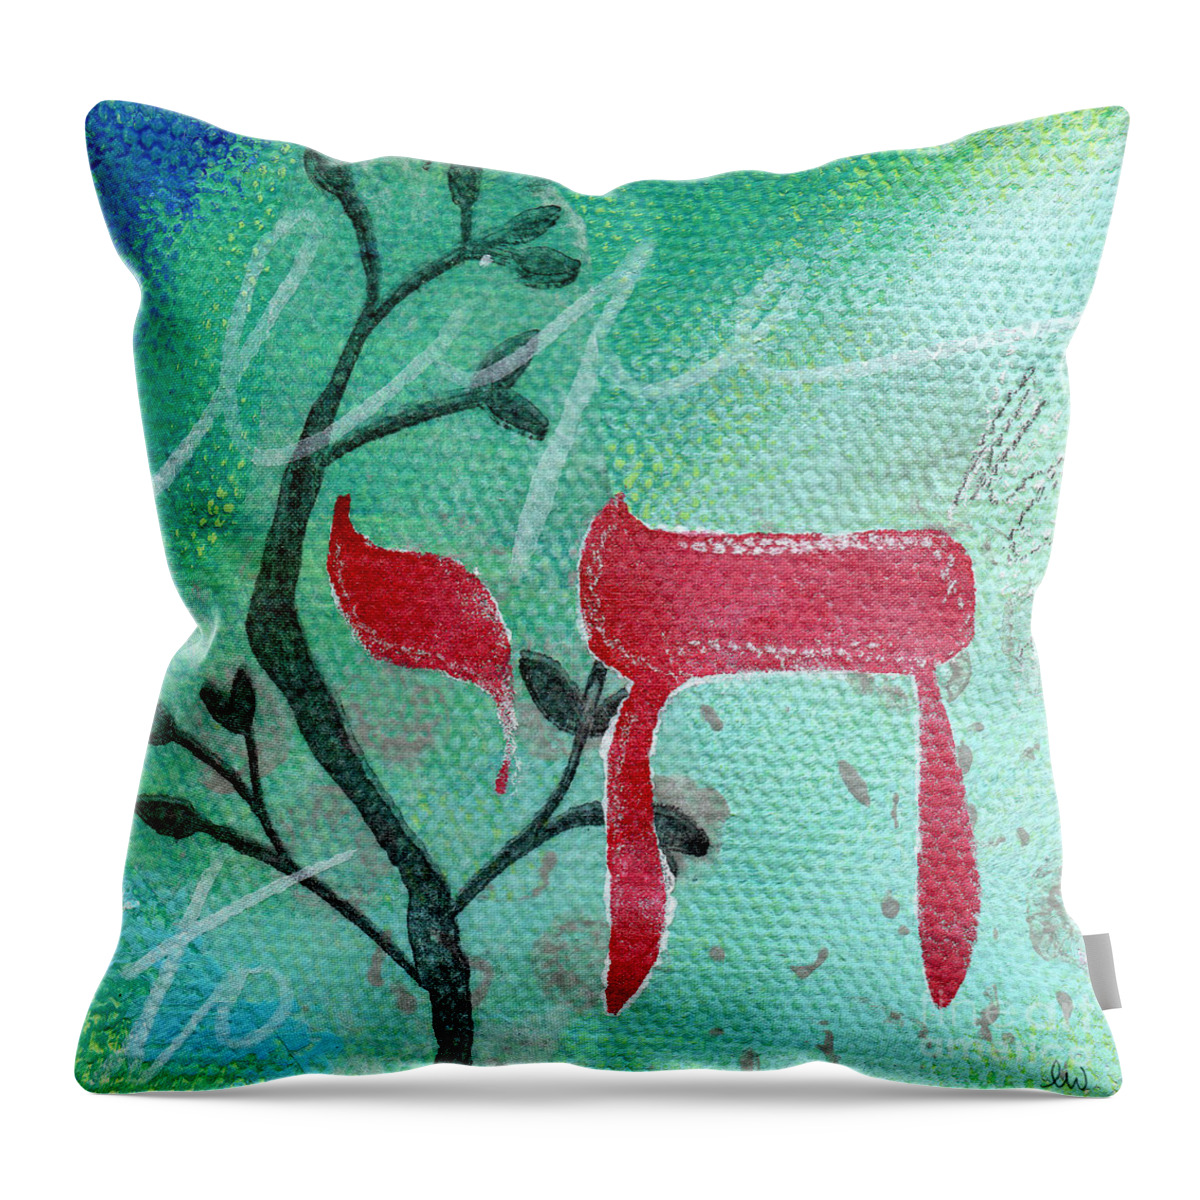 Life Throw Pillow featuring the painting To Life by Linda Woods